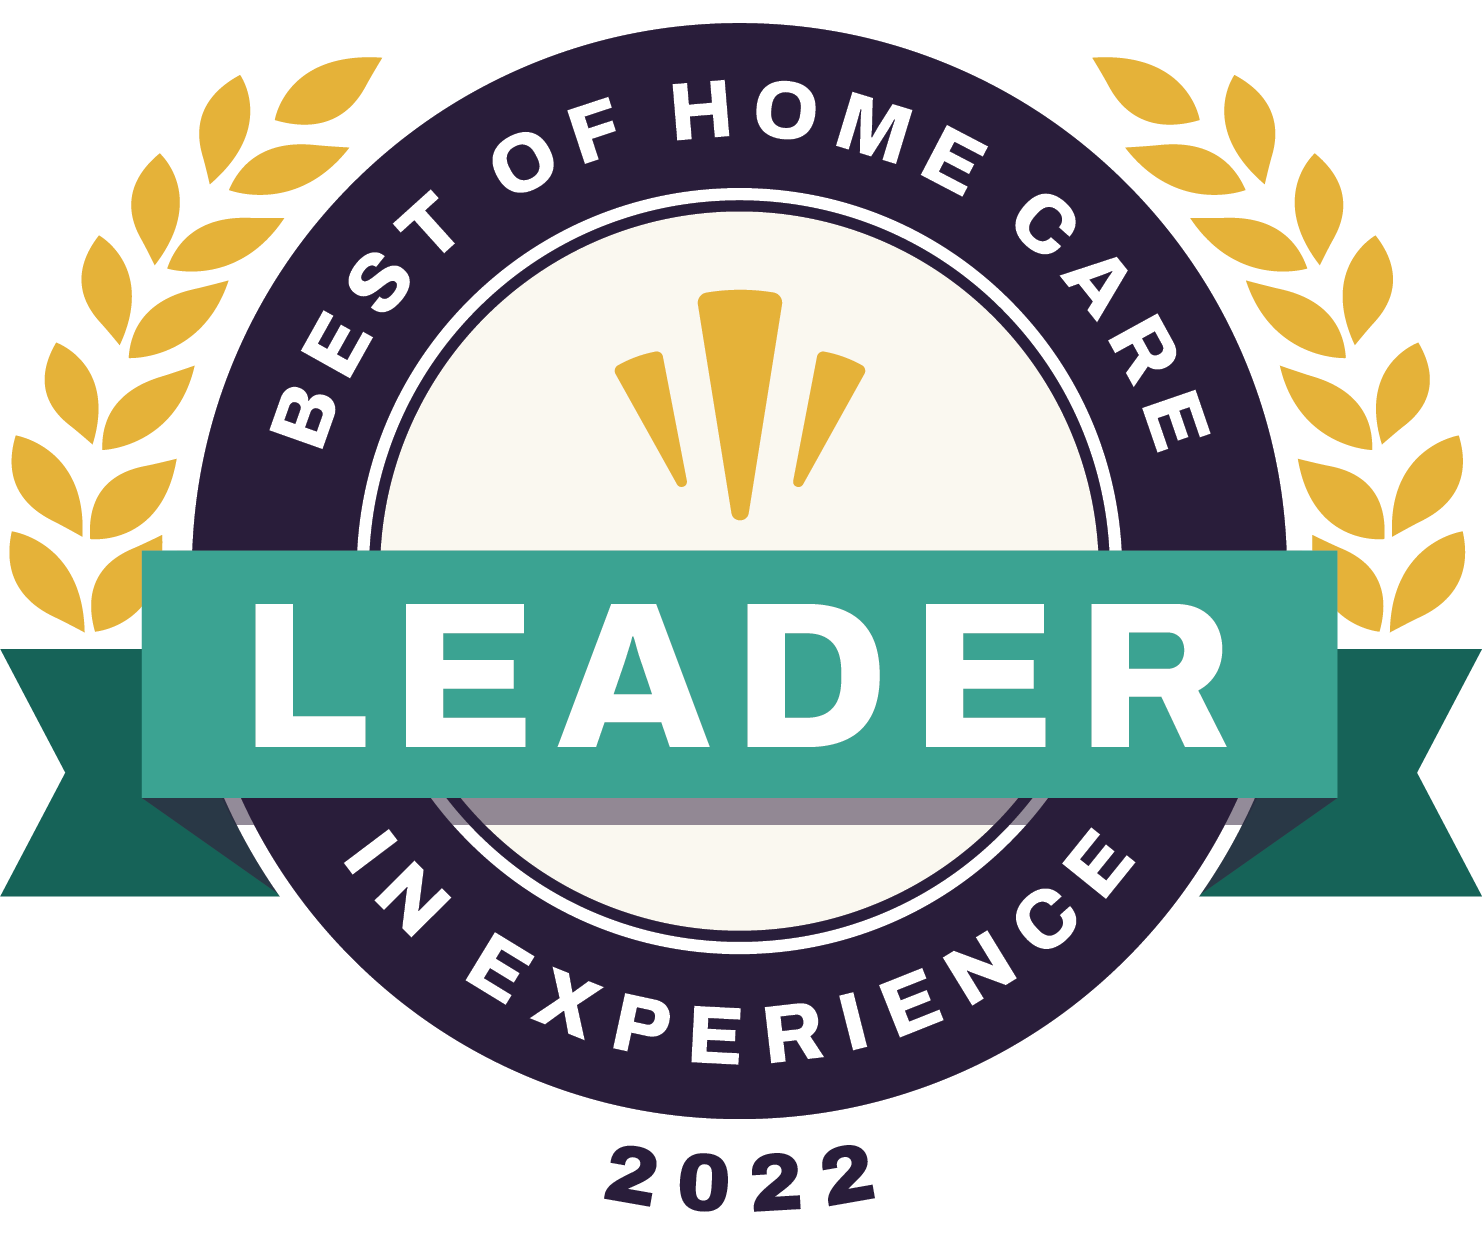 Leader in experience badge 